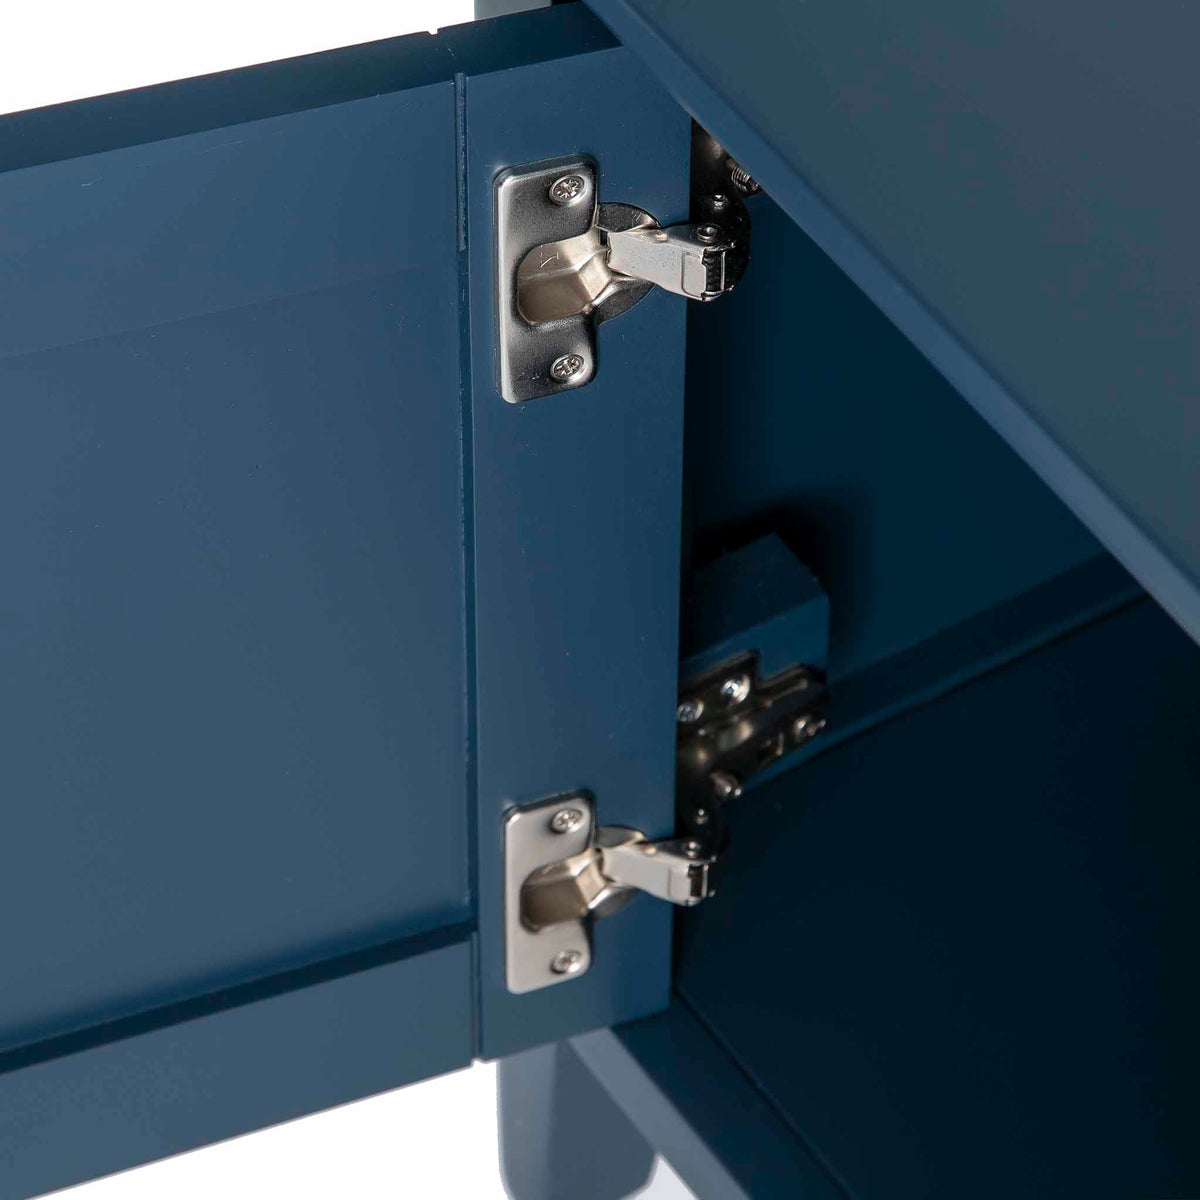 Stirling Blue Small TV Unit - Close up of inside cupboard